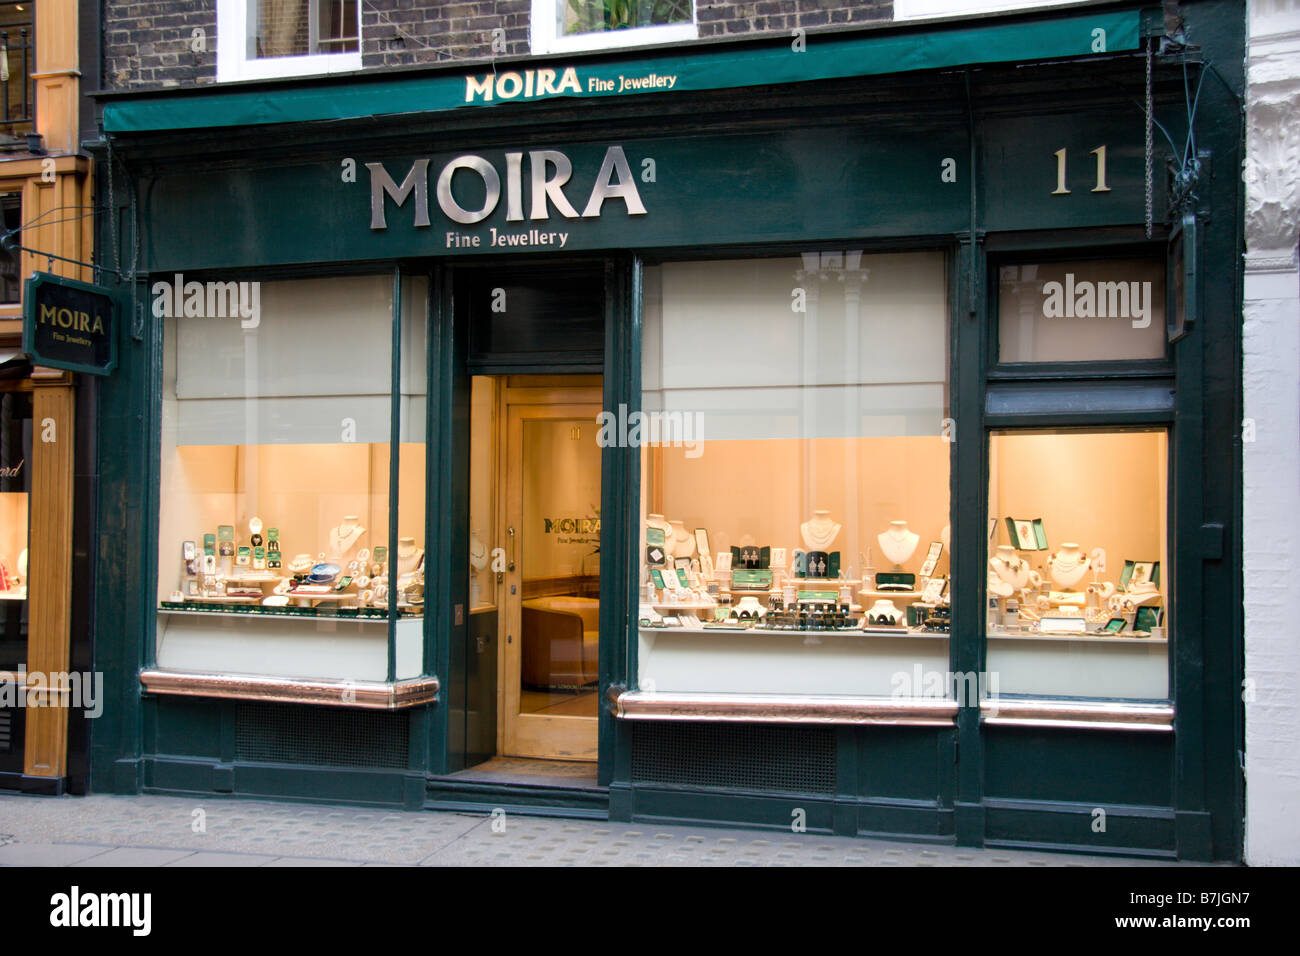 The shop front of the Moira Fine Jewellery store on New Bond Street, London. Jan 2009 Stock Photo